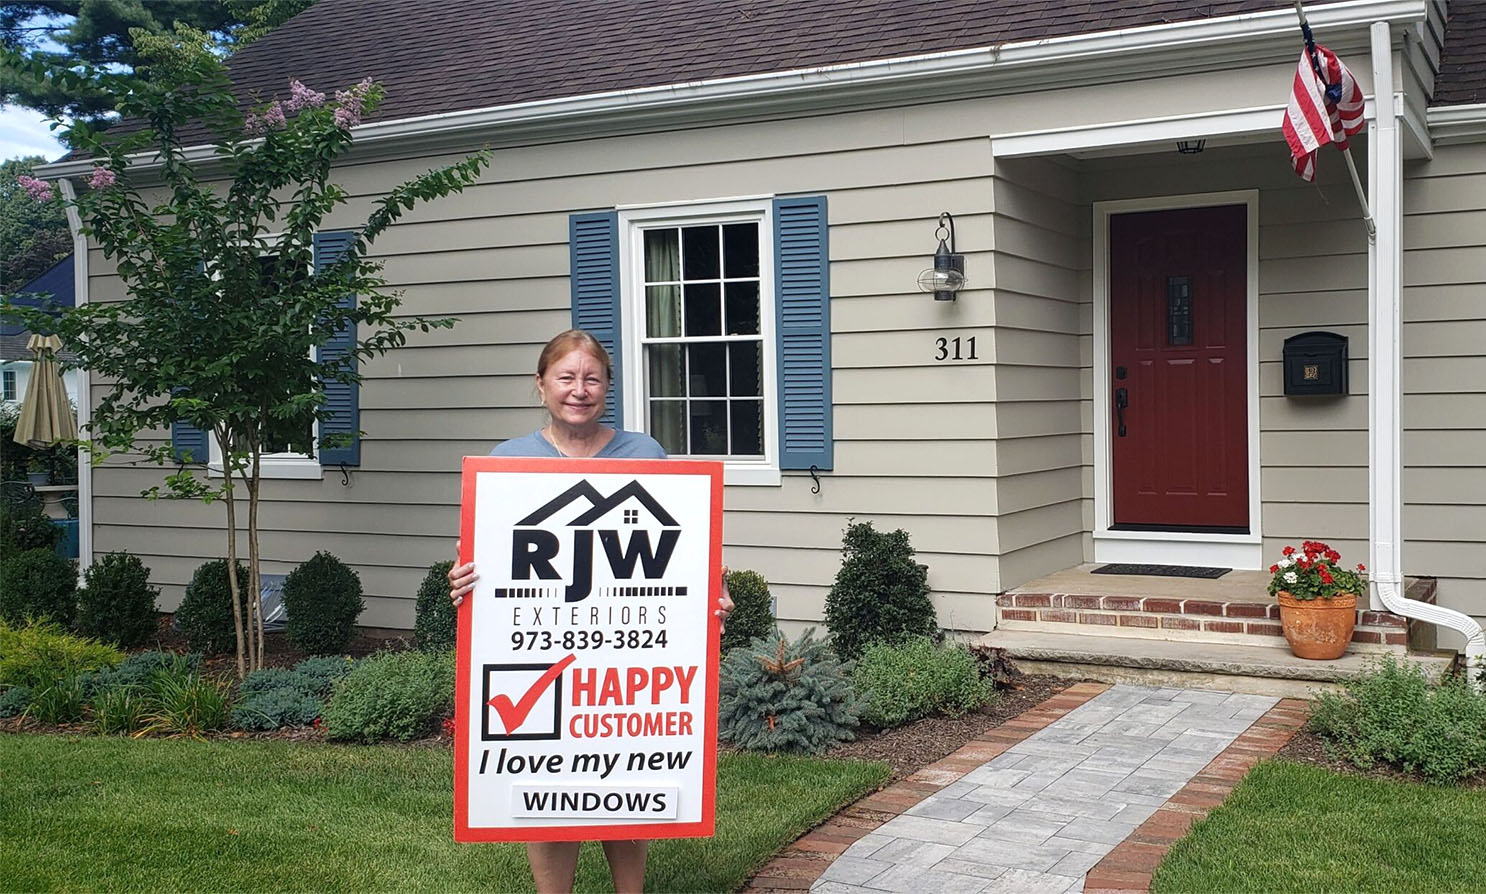 A woman holding a sign in front of a house.